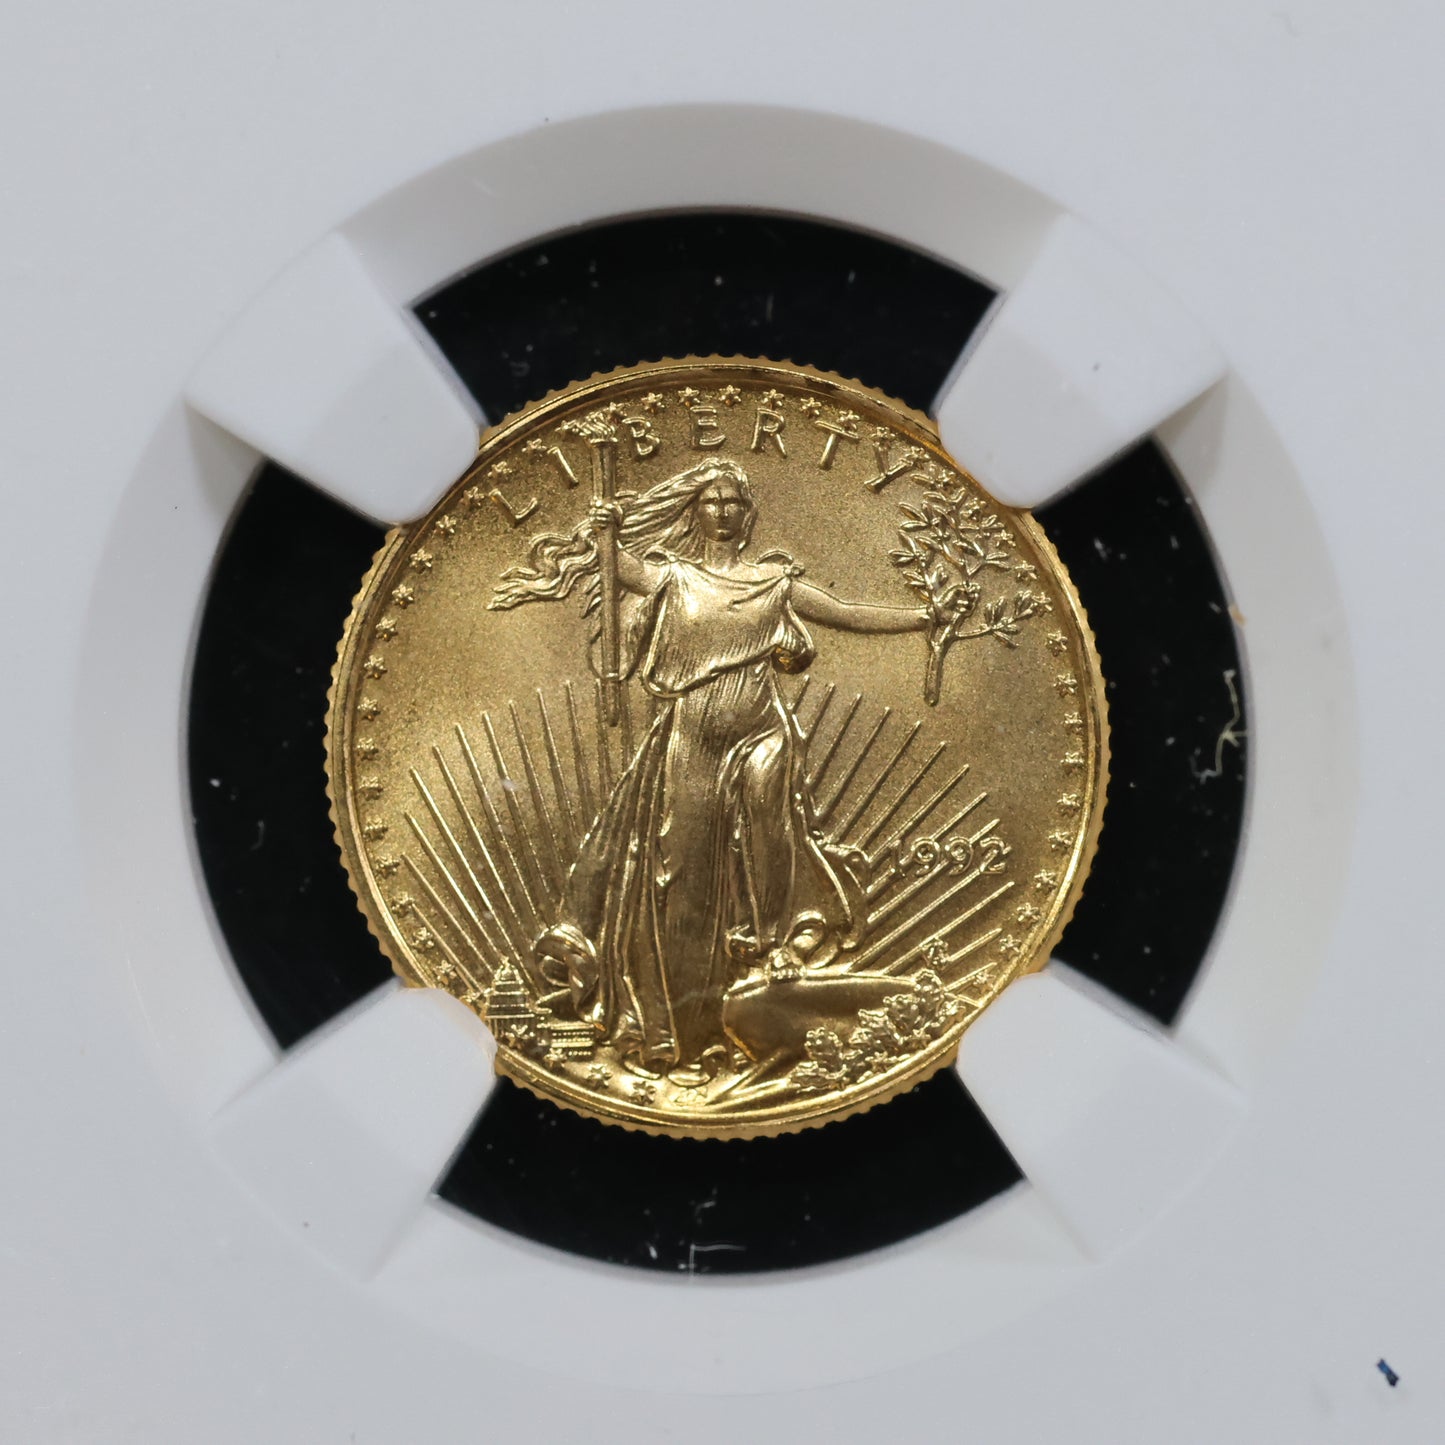 1992 1/10 oz Gold American Eagle 5$ Bullion Gold Coin - NGC MS 69